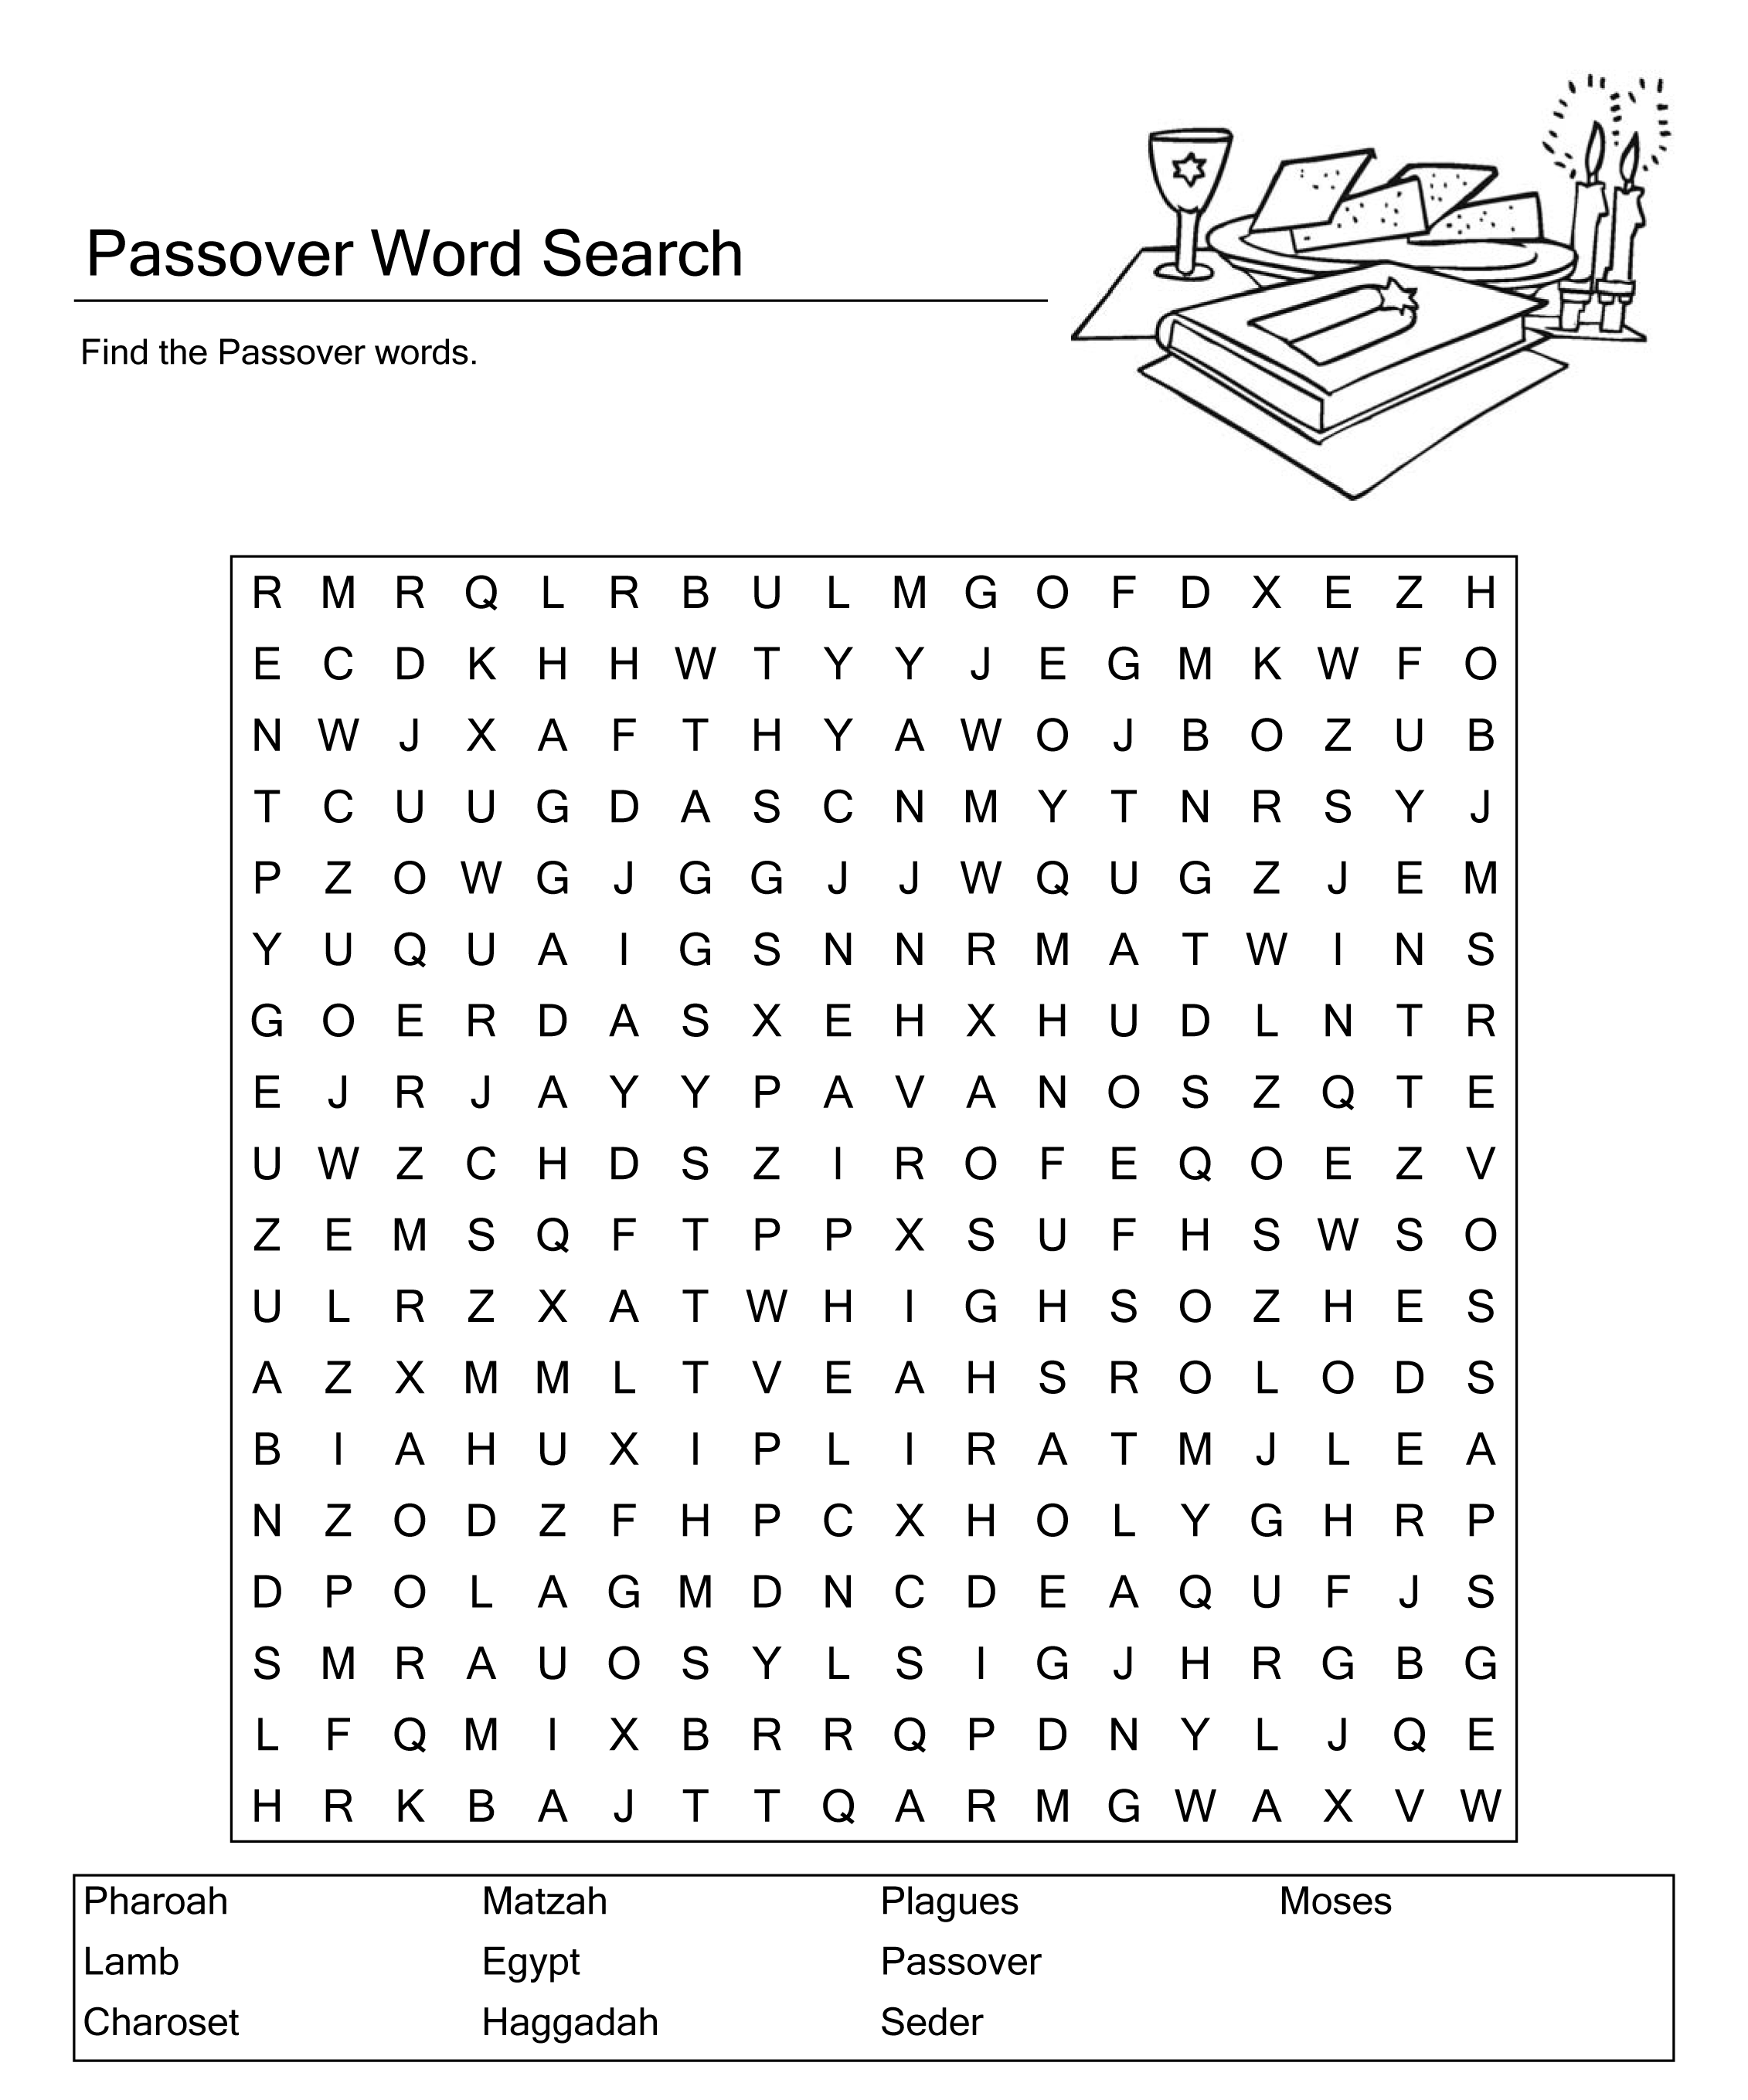 printable-passover-word-search